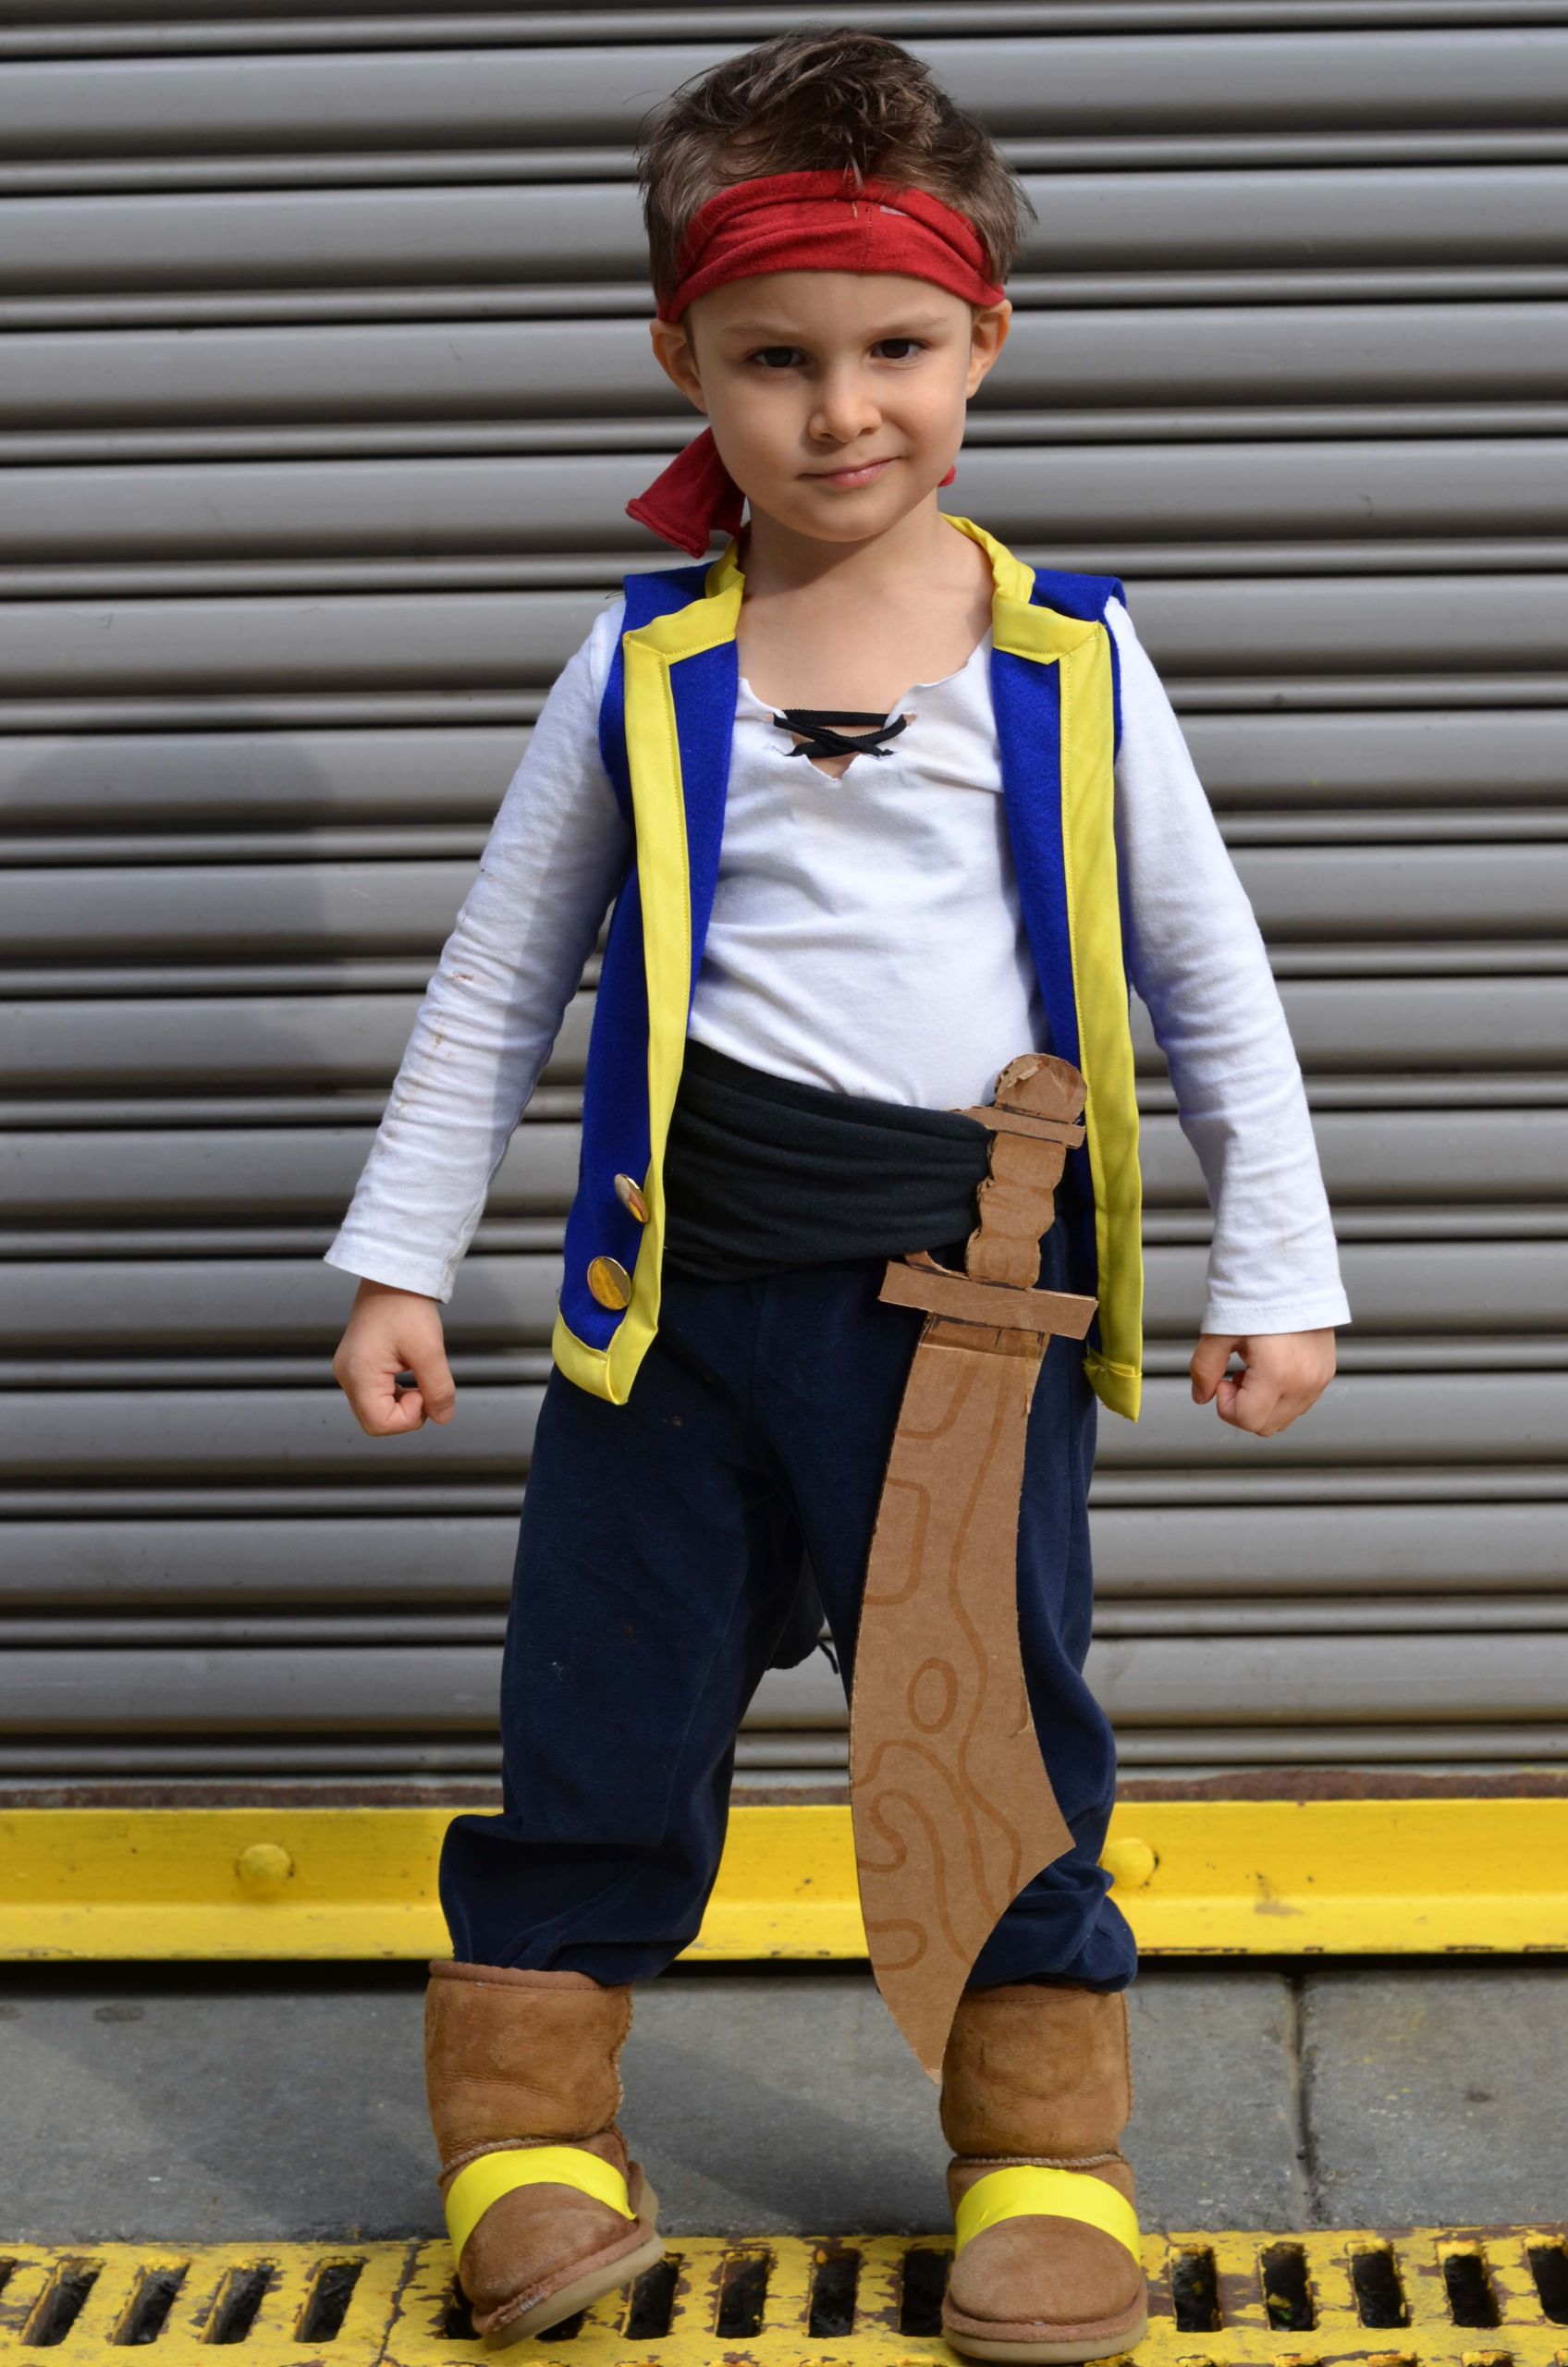 Pirates DIY Costumes
 DIY Jake and The Never Land Pirates Costume